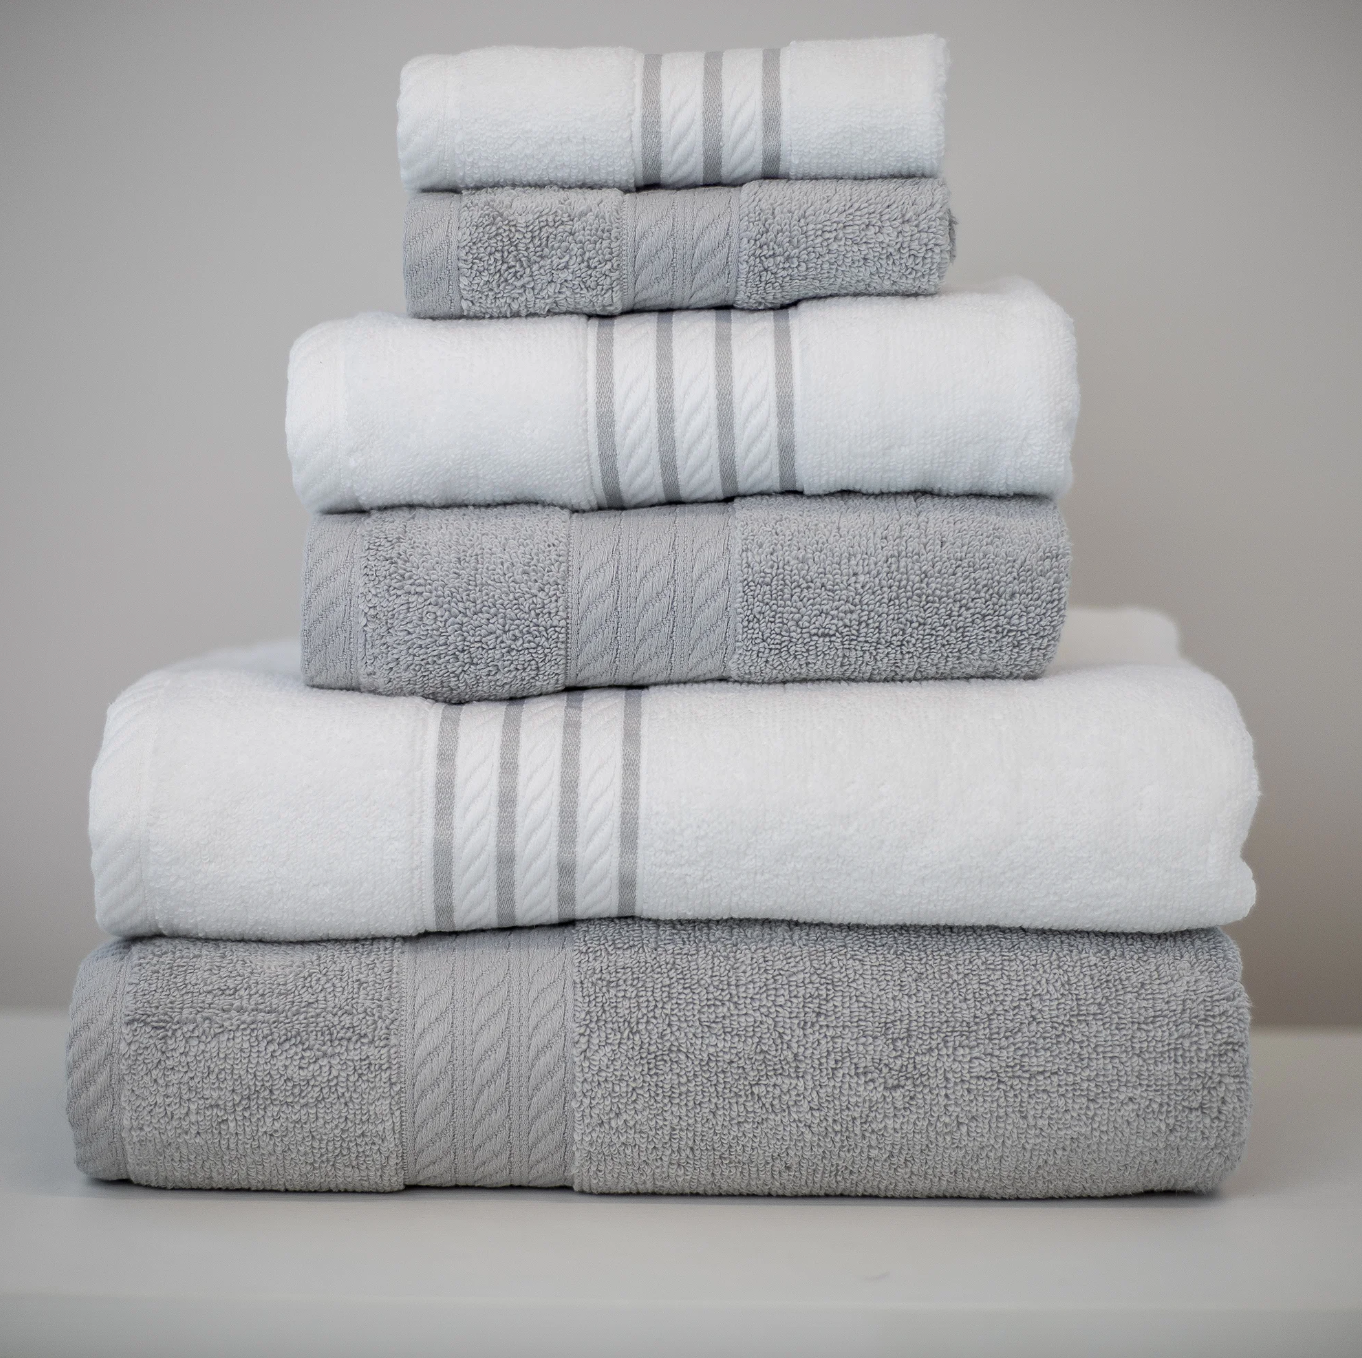 Made in Italy Bath Towel Set Terry Giovanni Dolcinotti GDN Ash Grey, 4 100% Cotton 